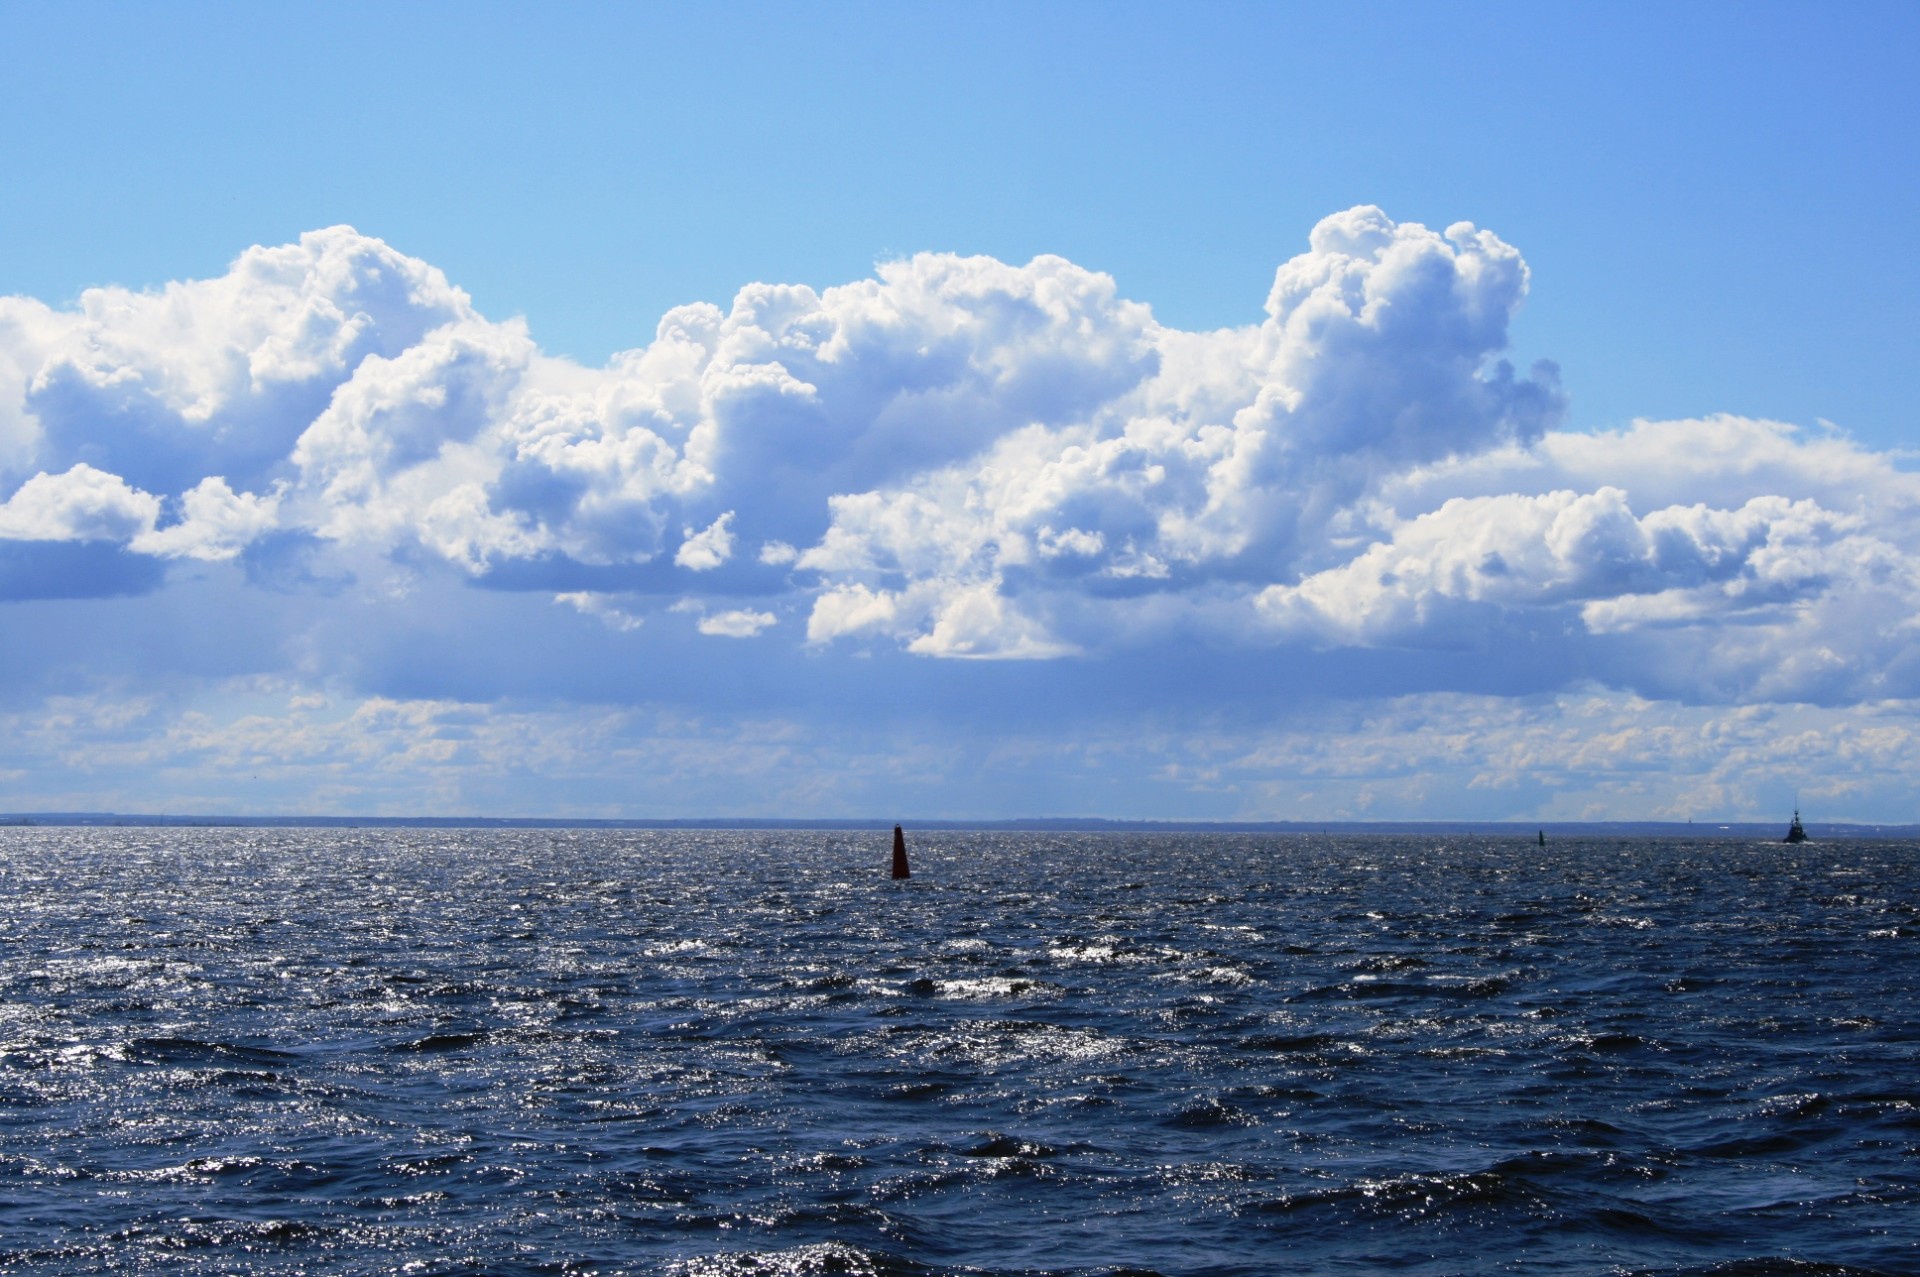 Approaching The Gulf Of Finland